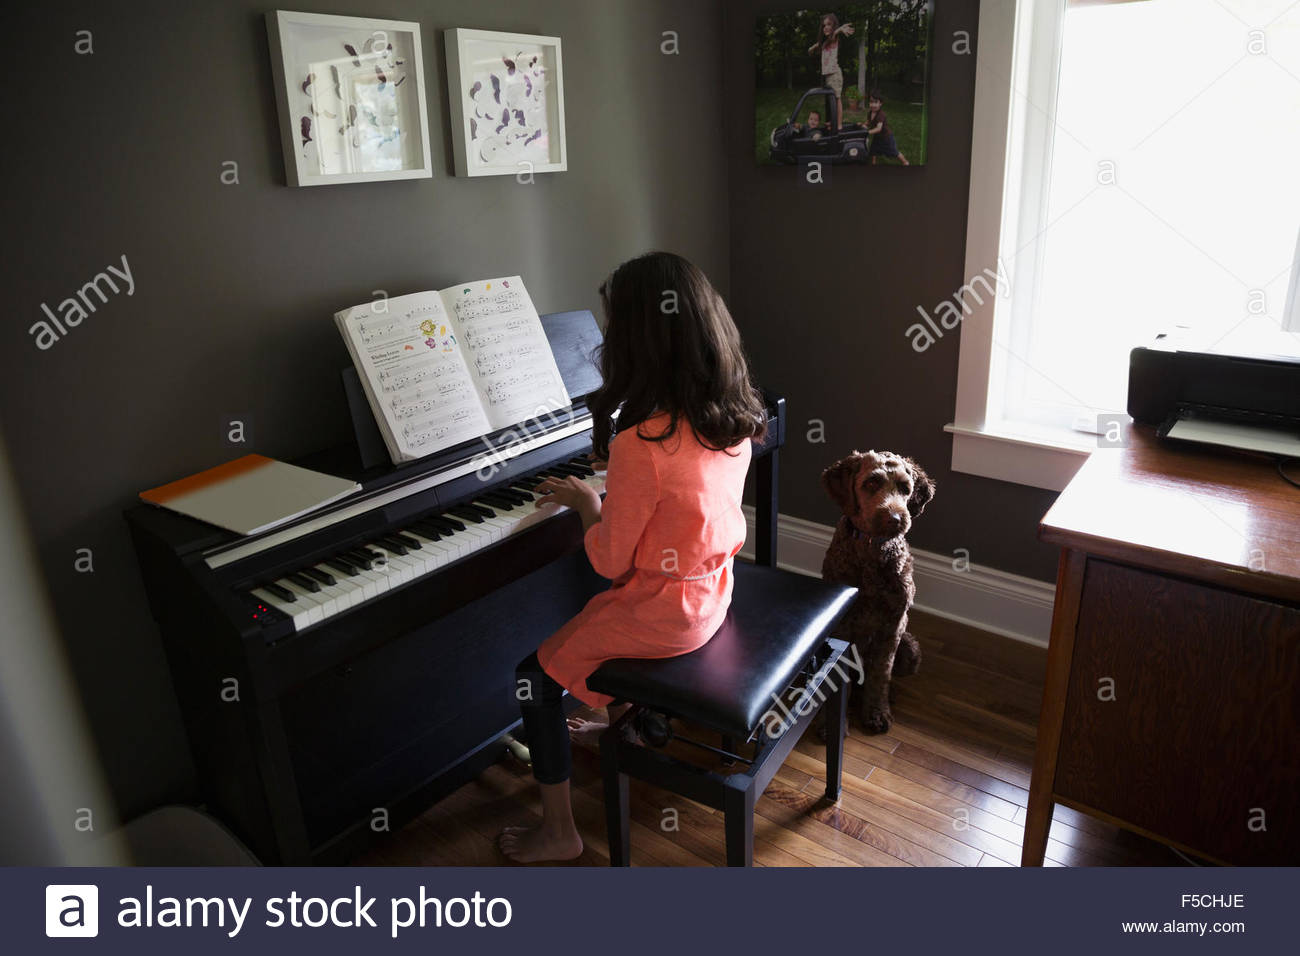 Dog waiting for girl playing piano Stock Photo